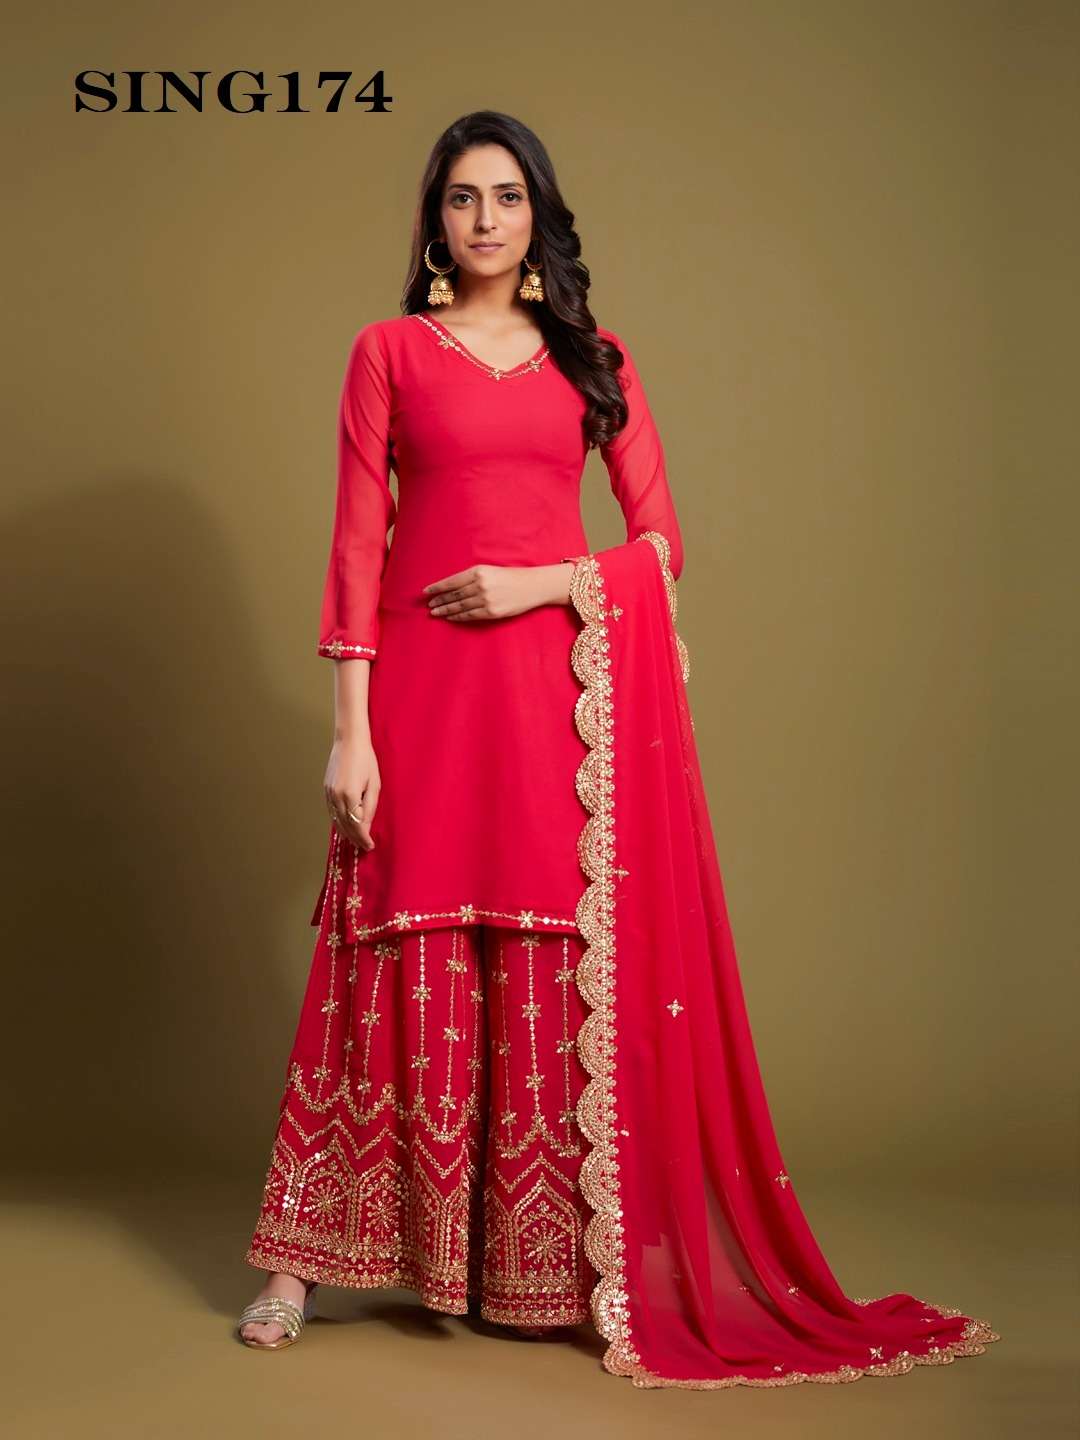 arya sing174 sequin zari work pink color readymade plazzo style suit 